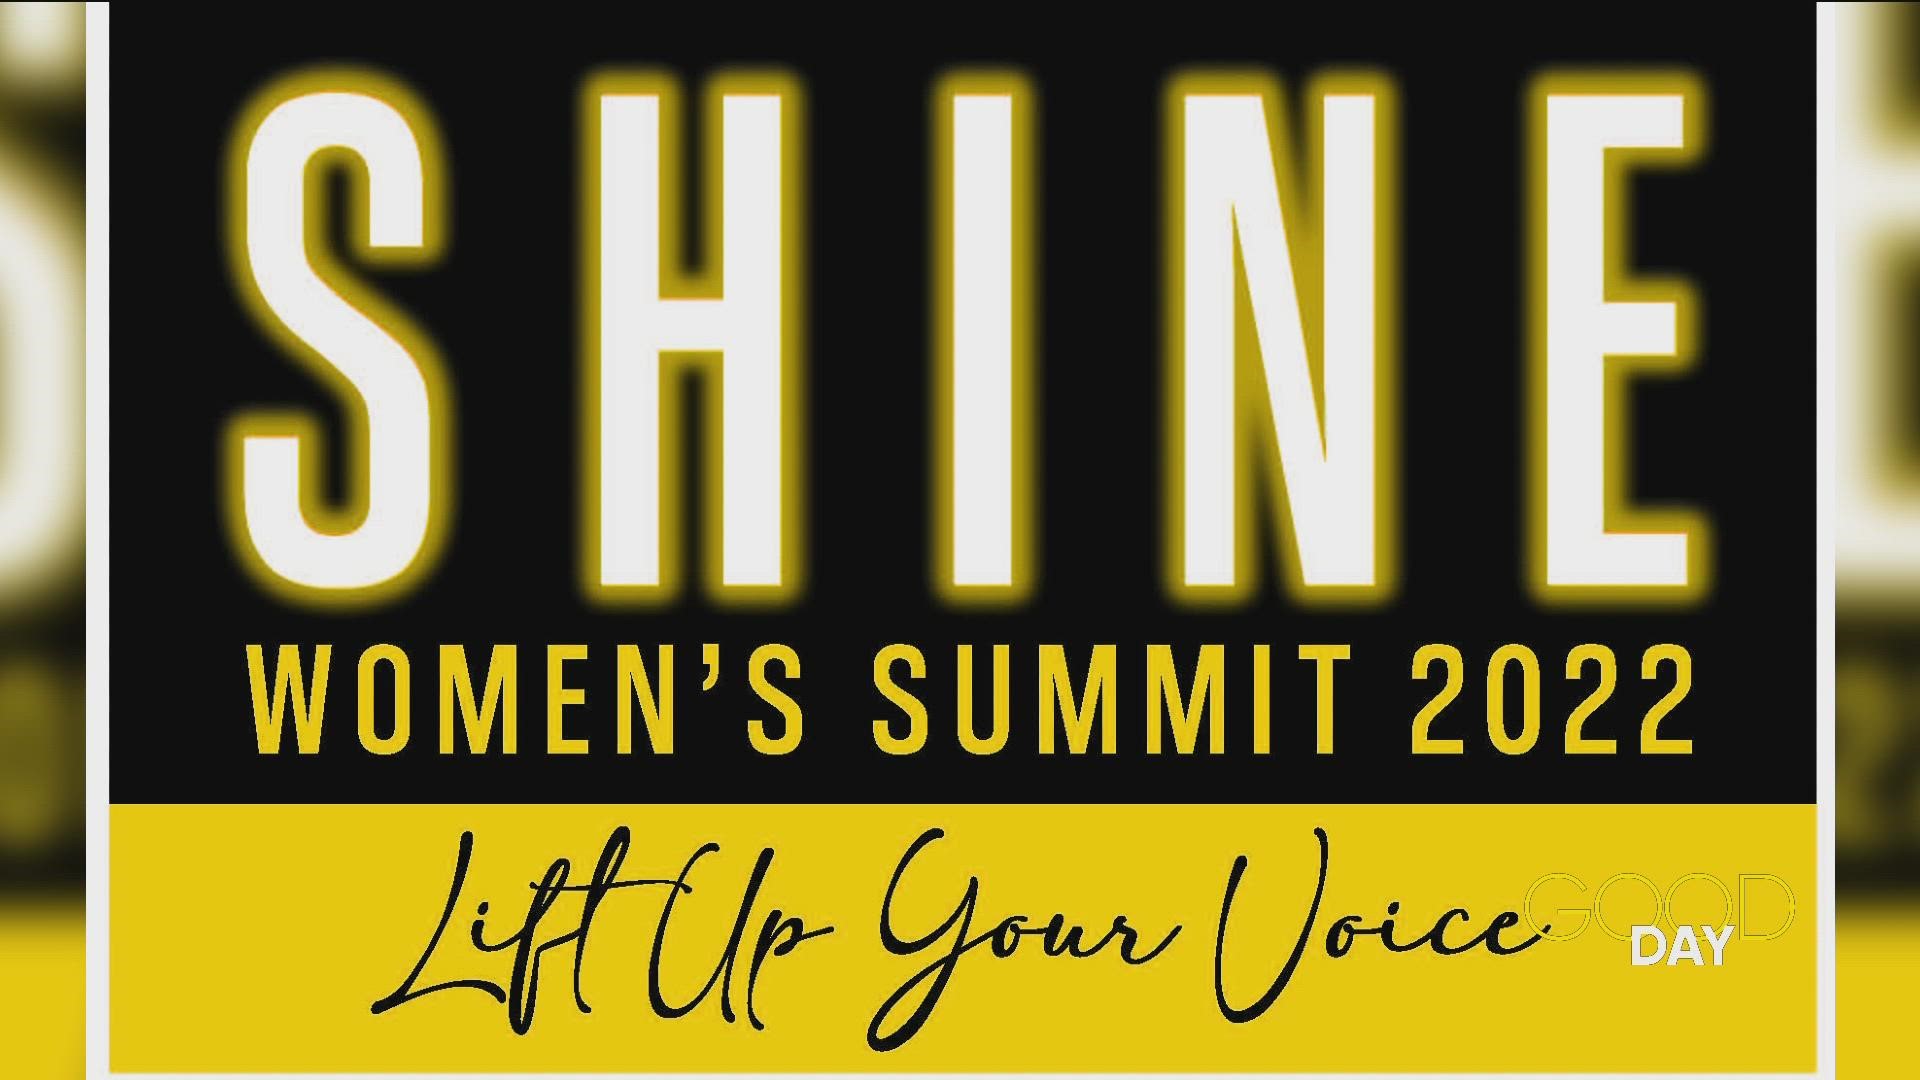 Tickets are still available for the summit, which is at the Valentine Theatre Thursday at 2 p.m.